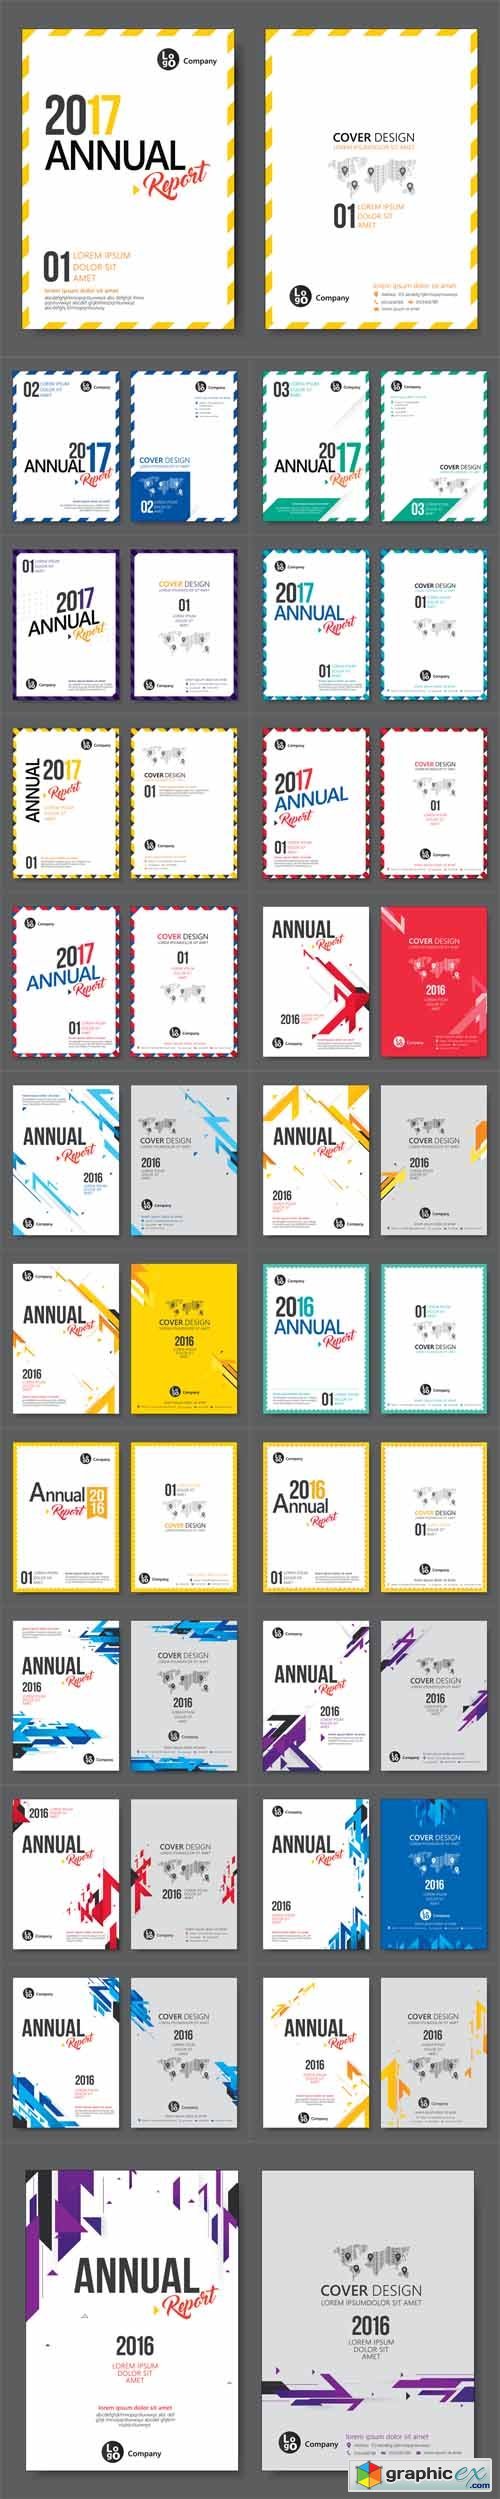 Flyer, Leafle, Annual Report Templates Flat Design in A4 Size